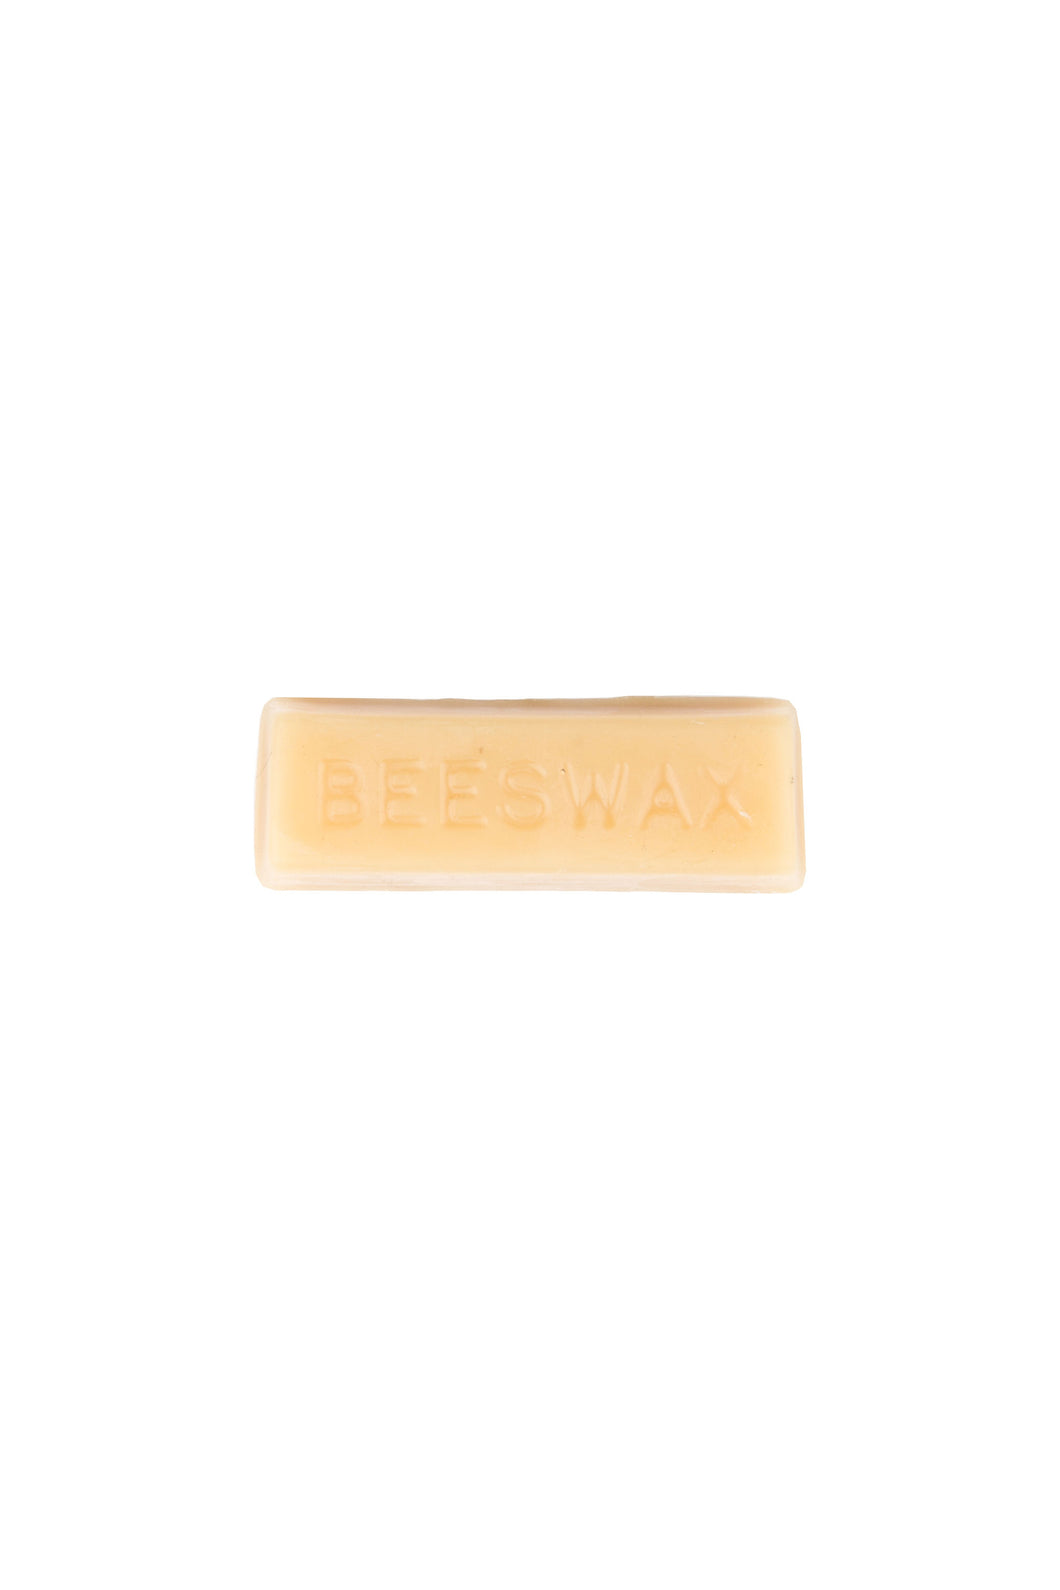 Fusion Distressing Beeswax Block - Accessories